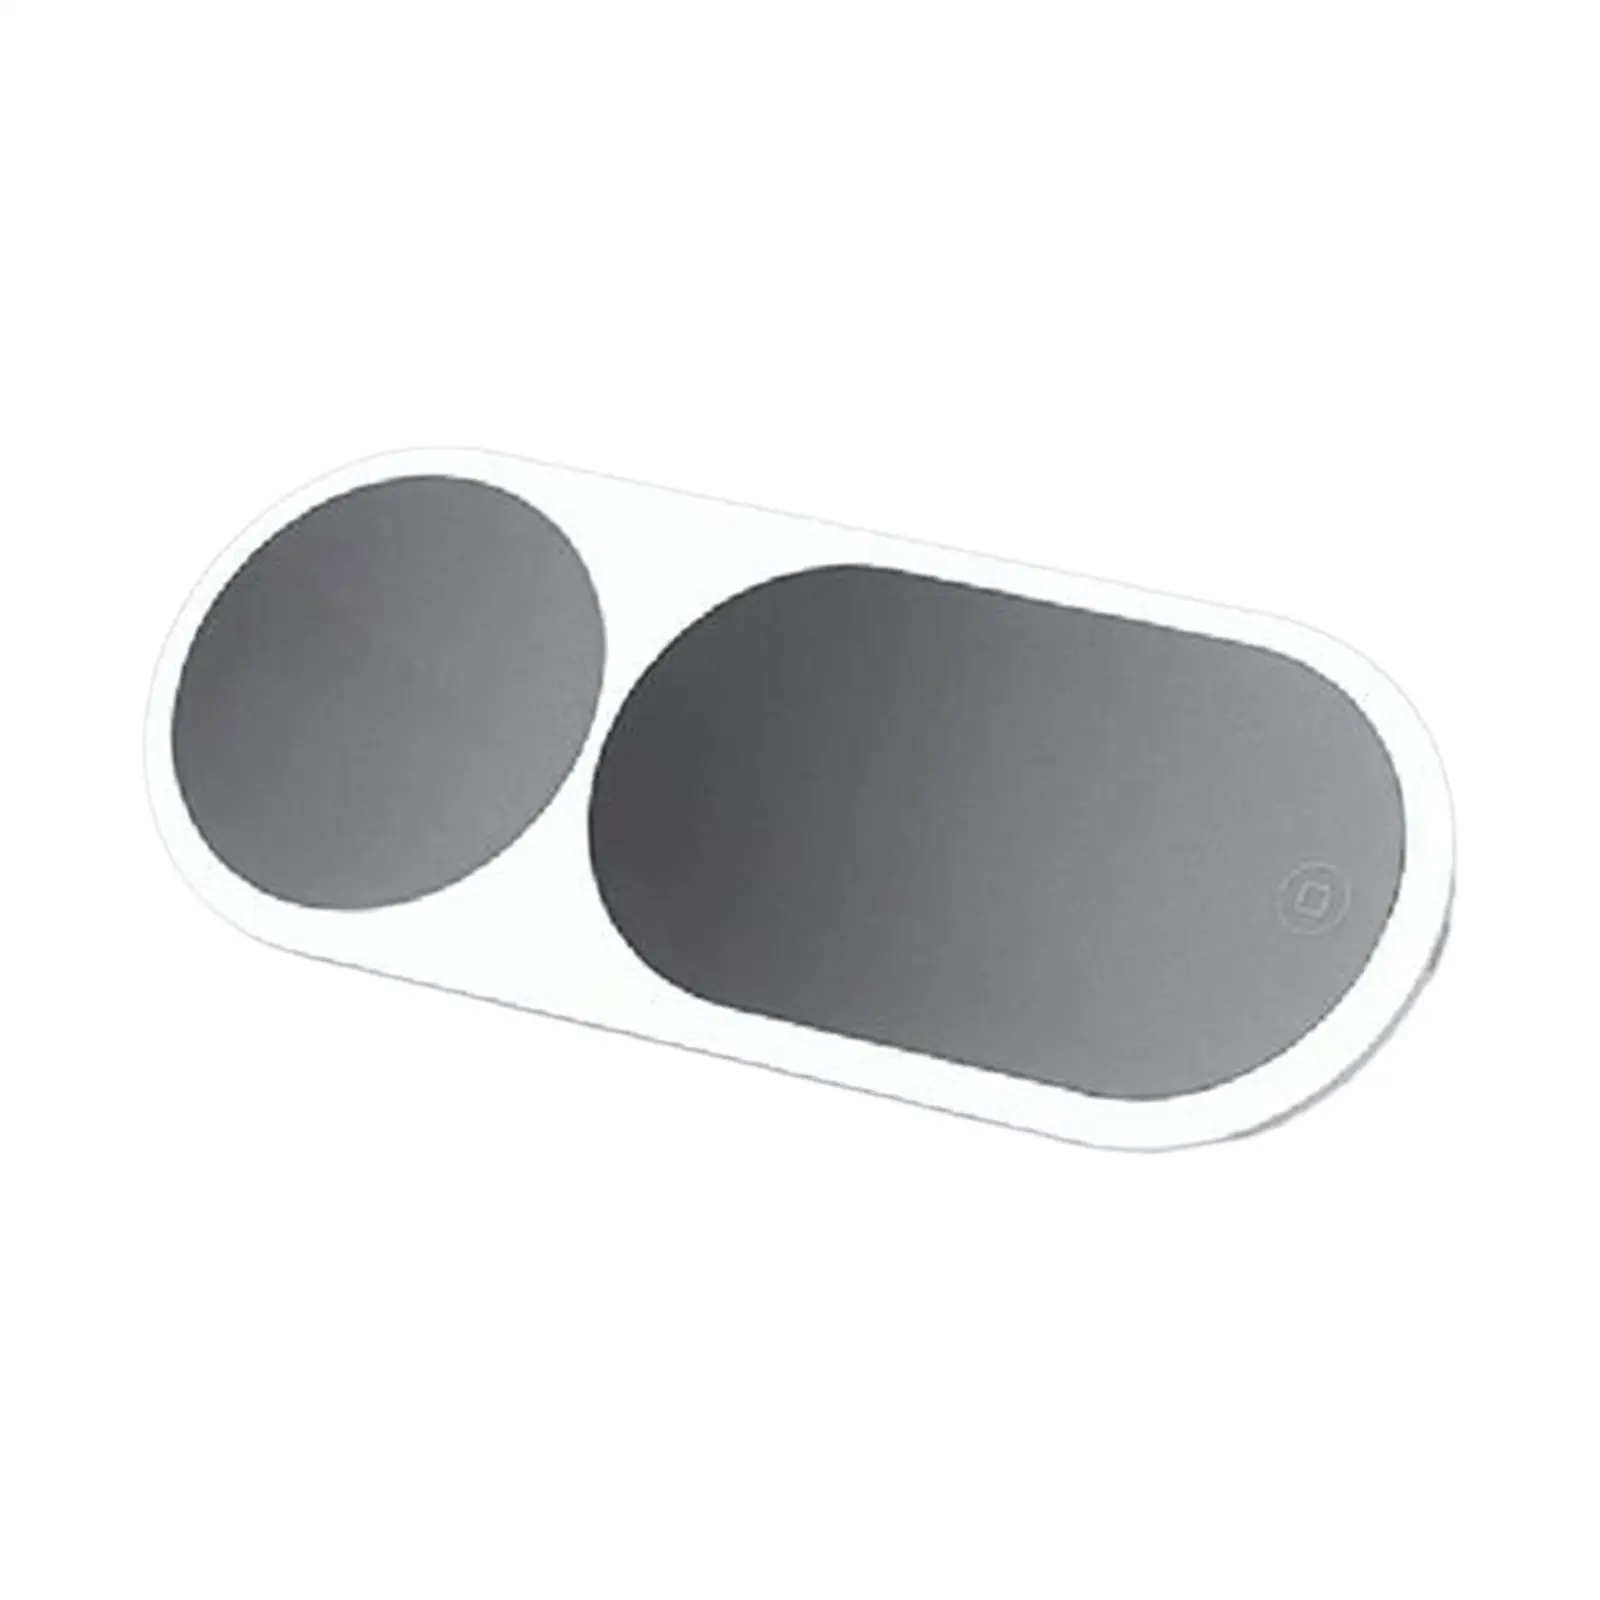 Car Sun Visor Makeup Mirror Replacement Part High Quality Easy to Install Auto Vanity Mirror for Automobile Truck SUV Car